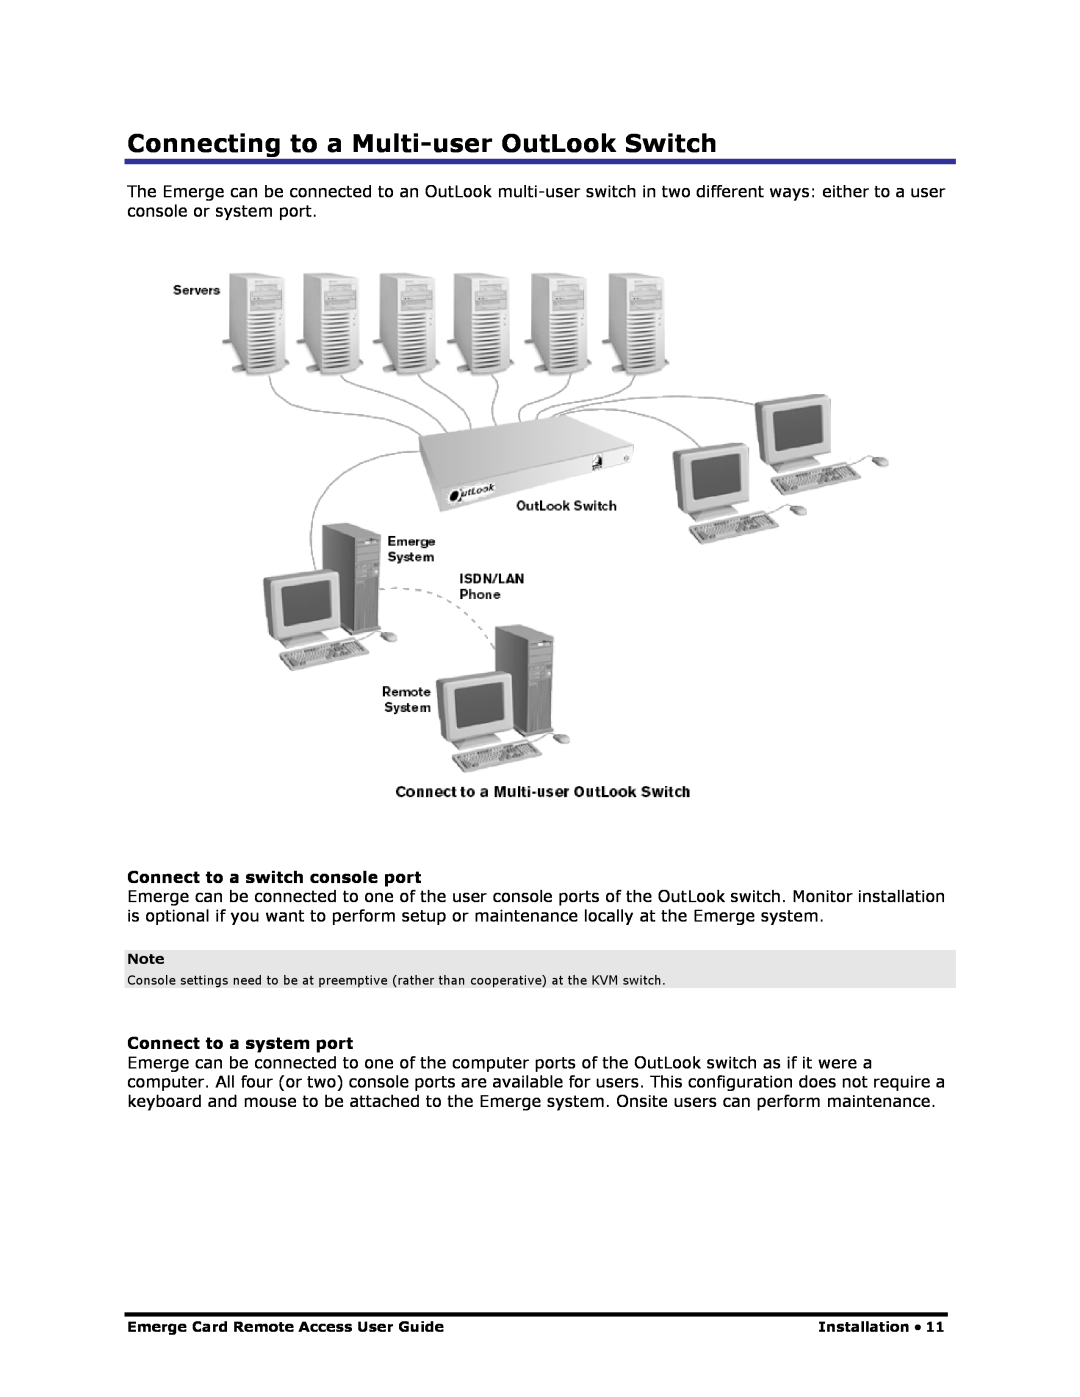 Apex Digital Apex EmergeCard Remote Access manual Connecting to a Multi-user OutLook Switch, Connect to a system port 